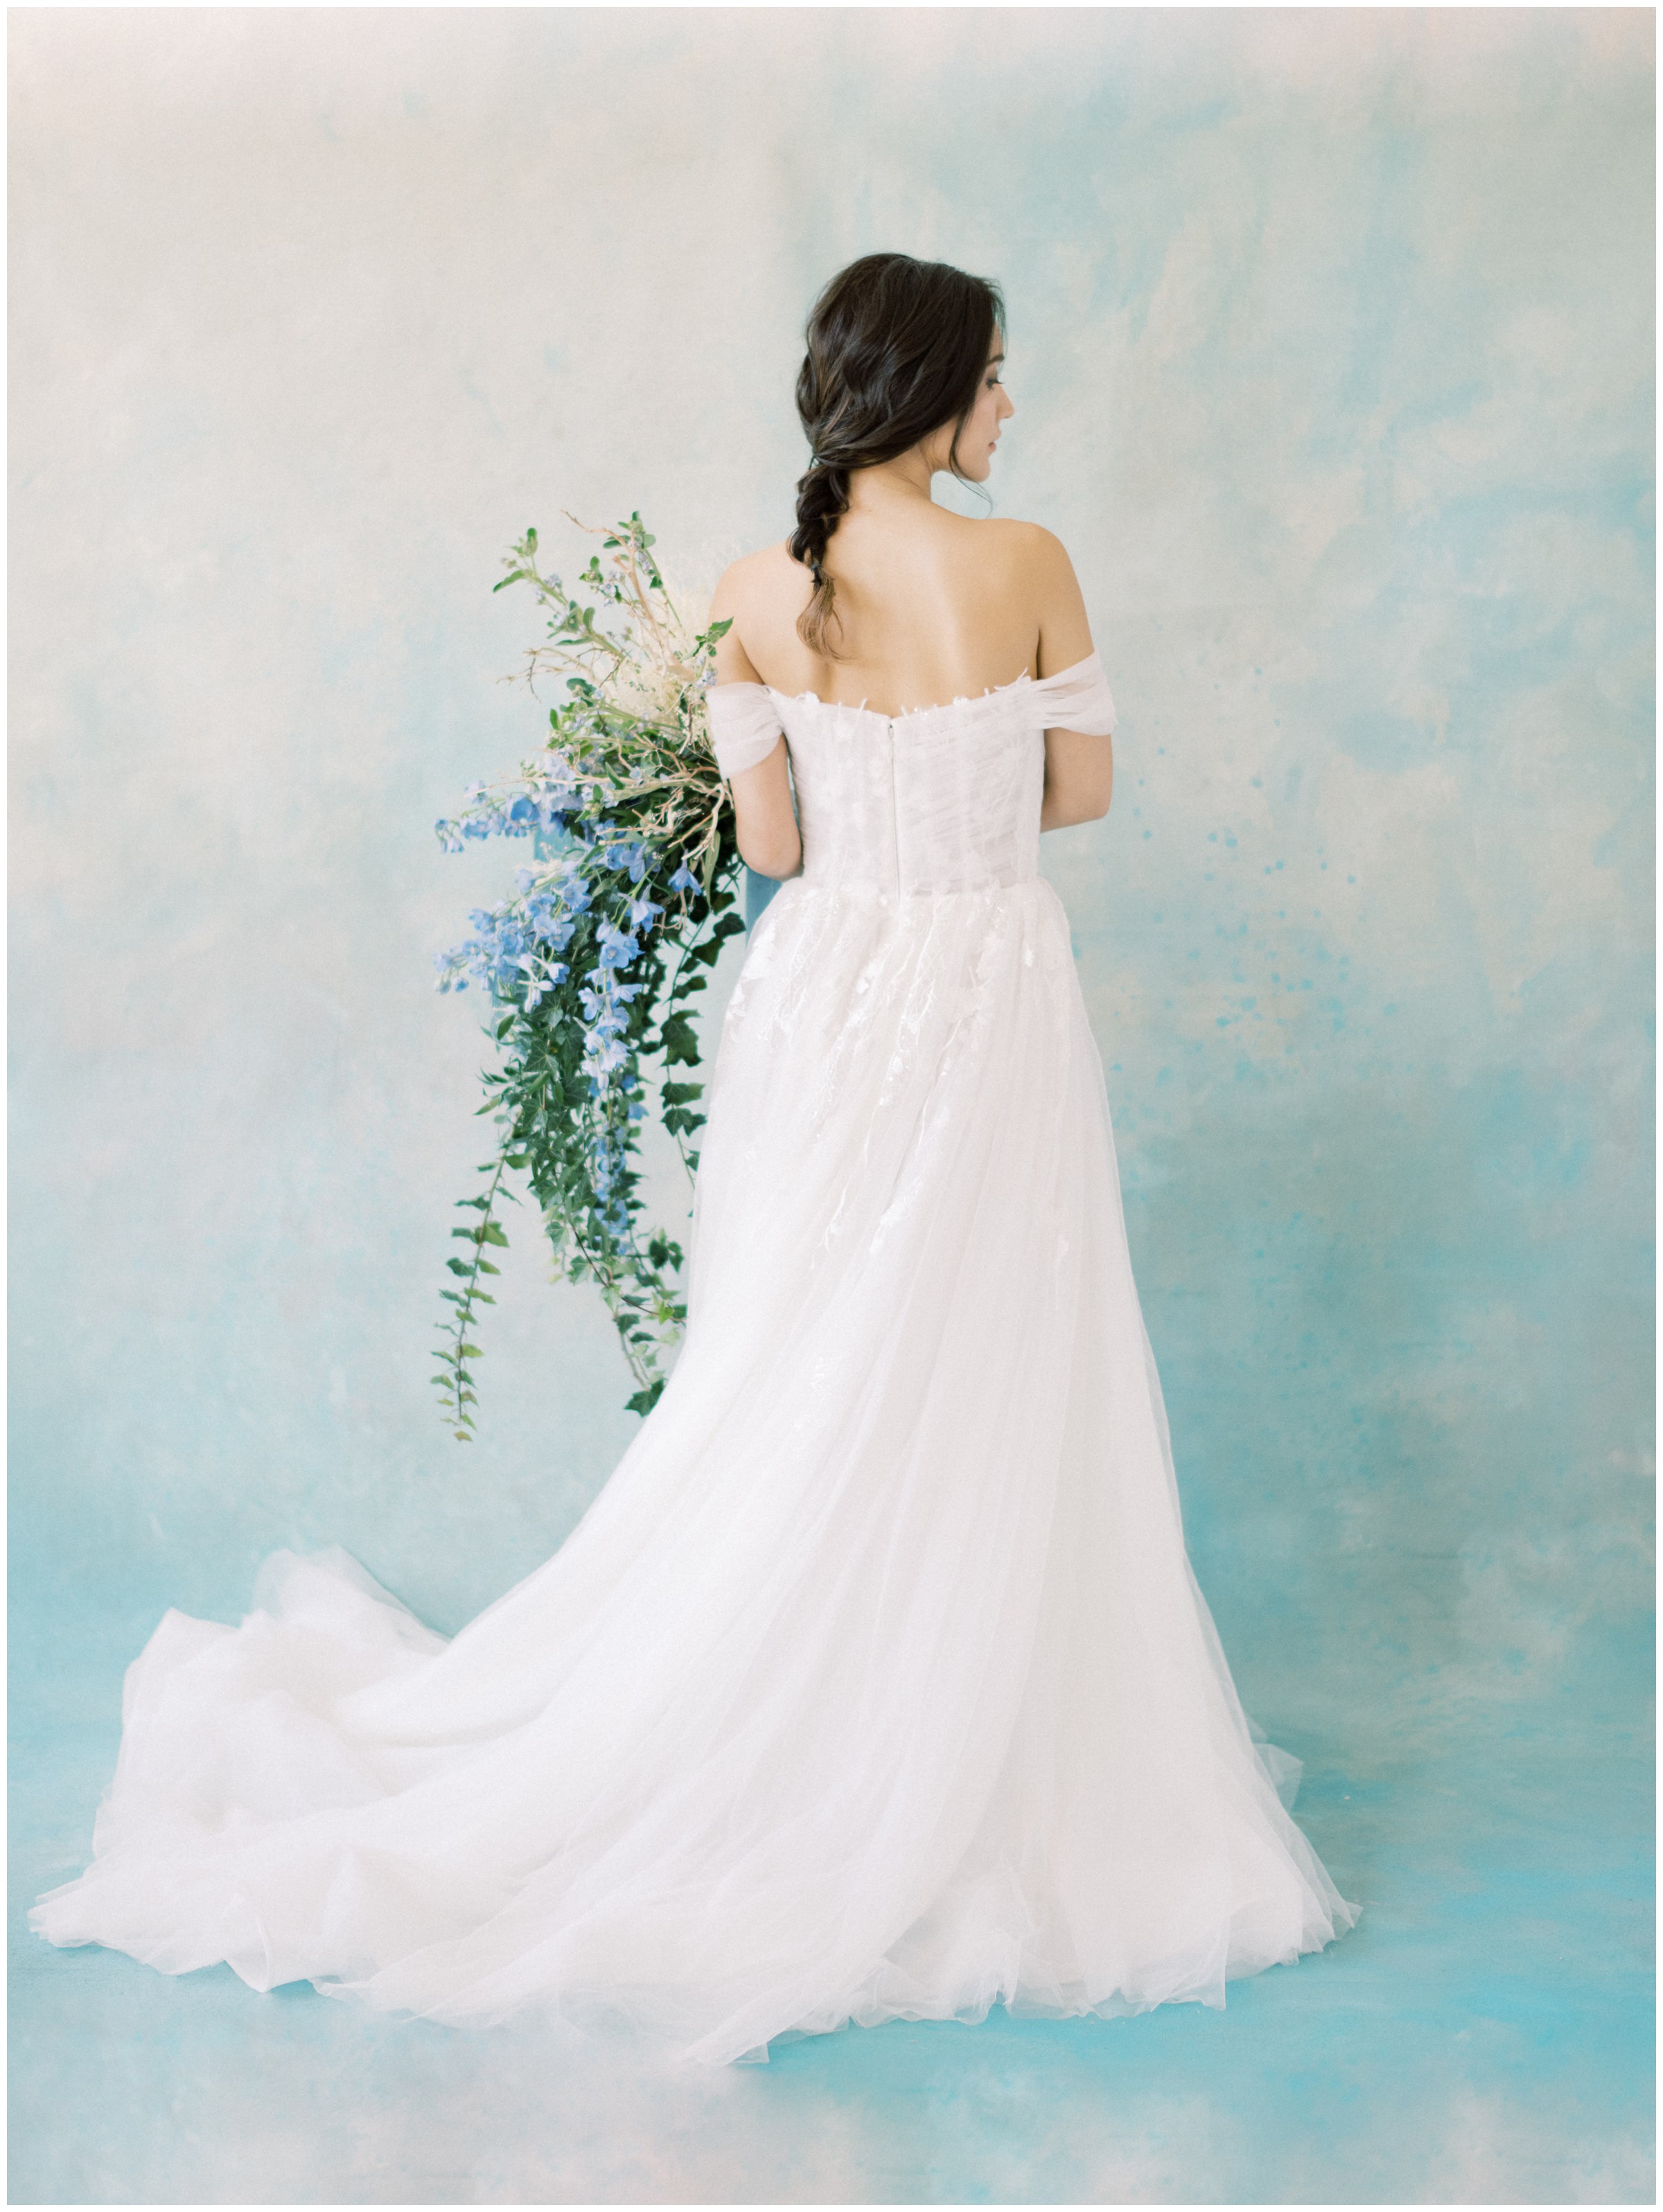 Five Elements | Bridal Inspiration Editorial – Ether & Smith